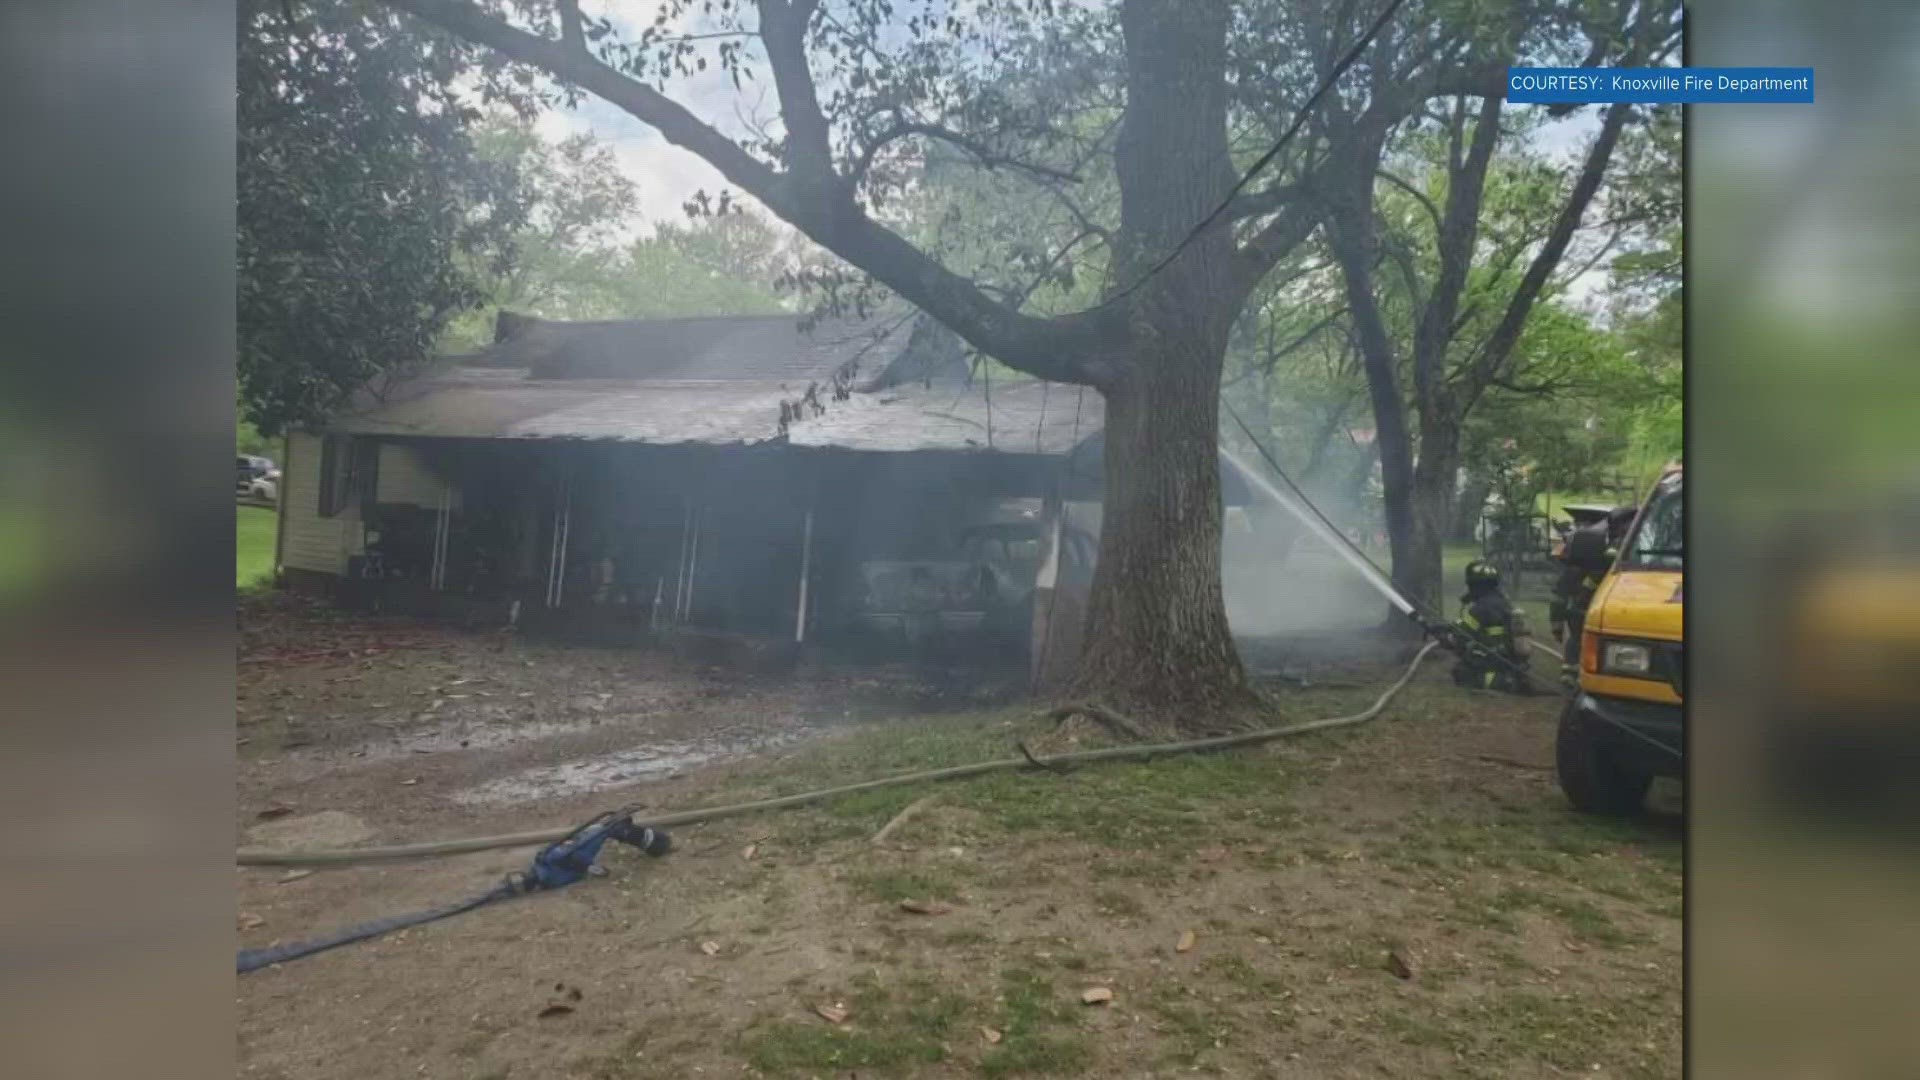 The fire happened at the 4600 block of Lonas Road. According to Knoxville Fire, the blaze started in the truck before spreading to the home.